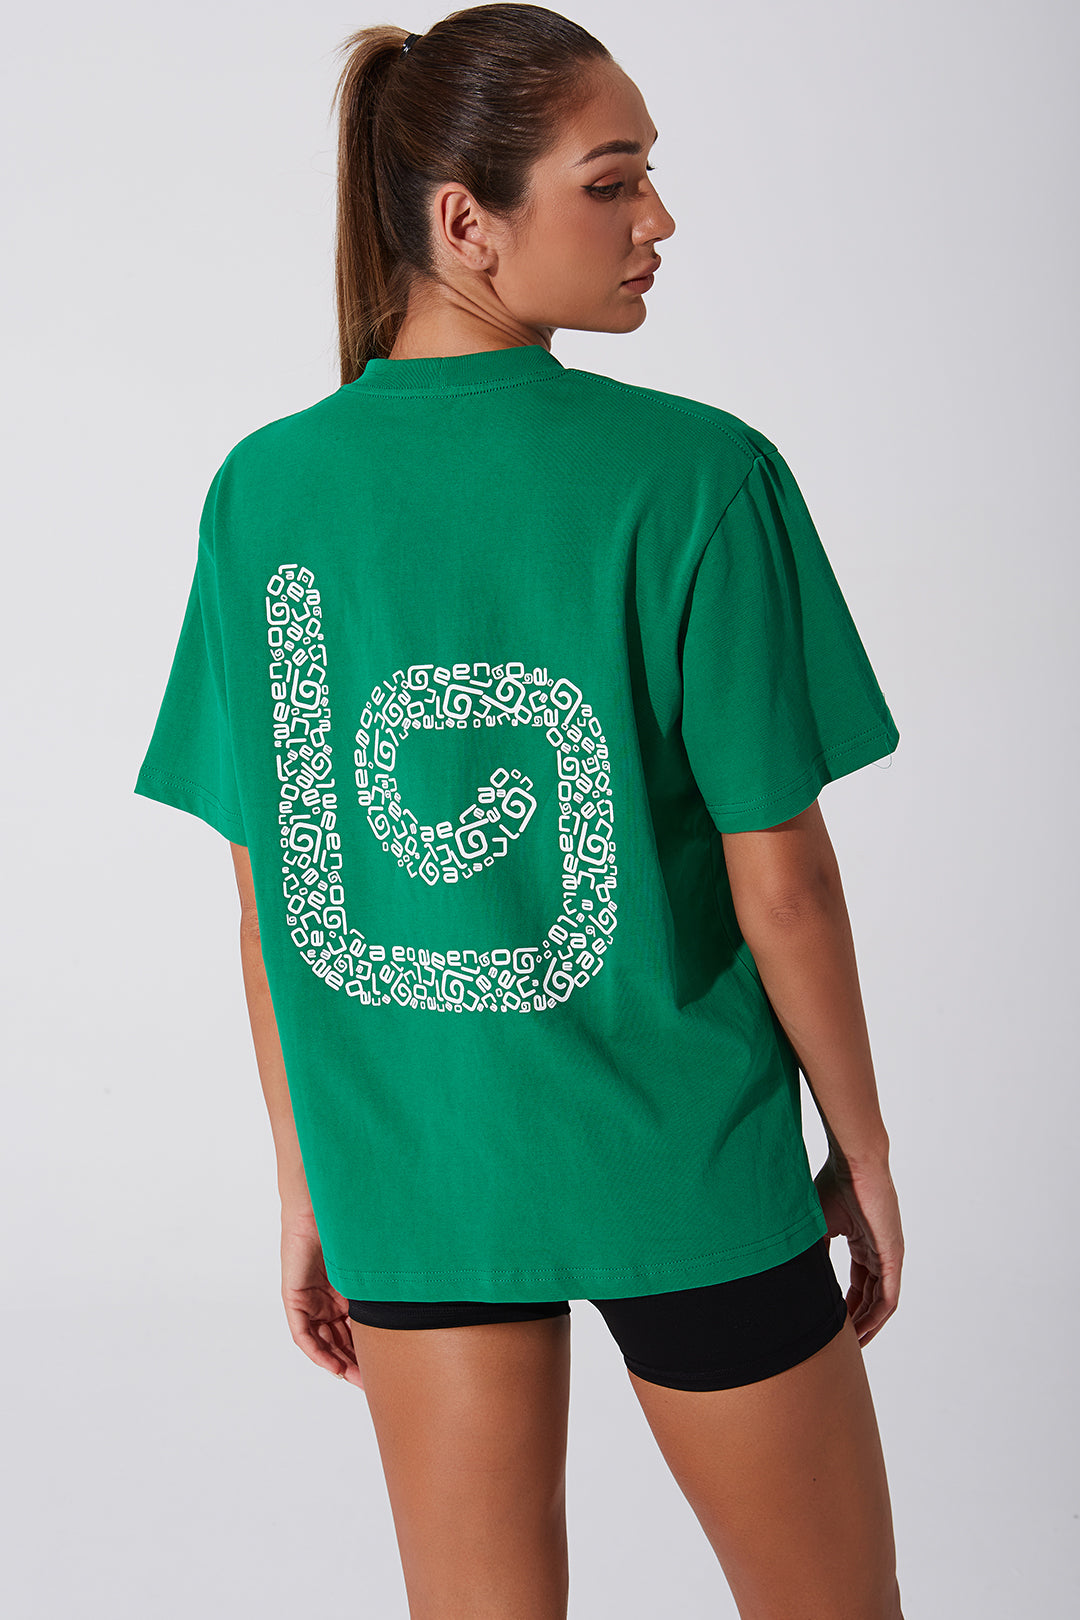 Unisex green short sleeve tee for women - Limited edition - OW-0173-WSS-GN.